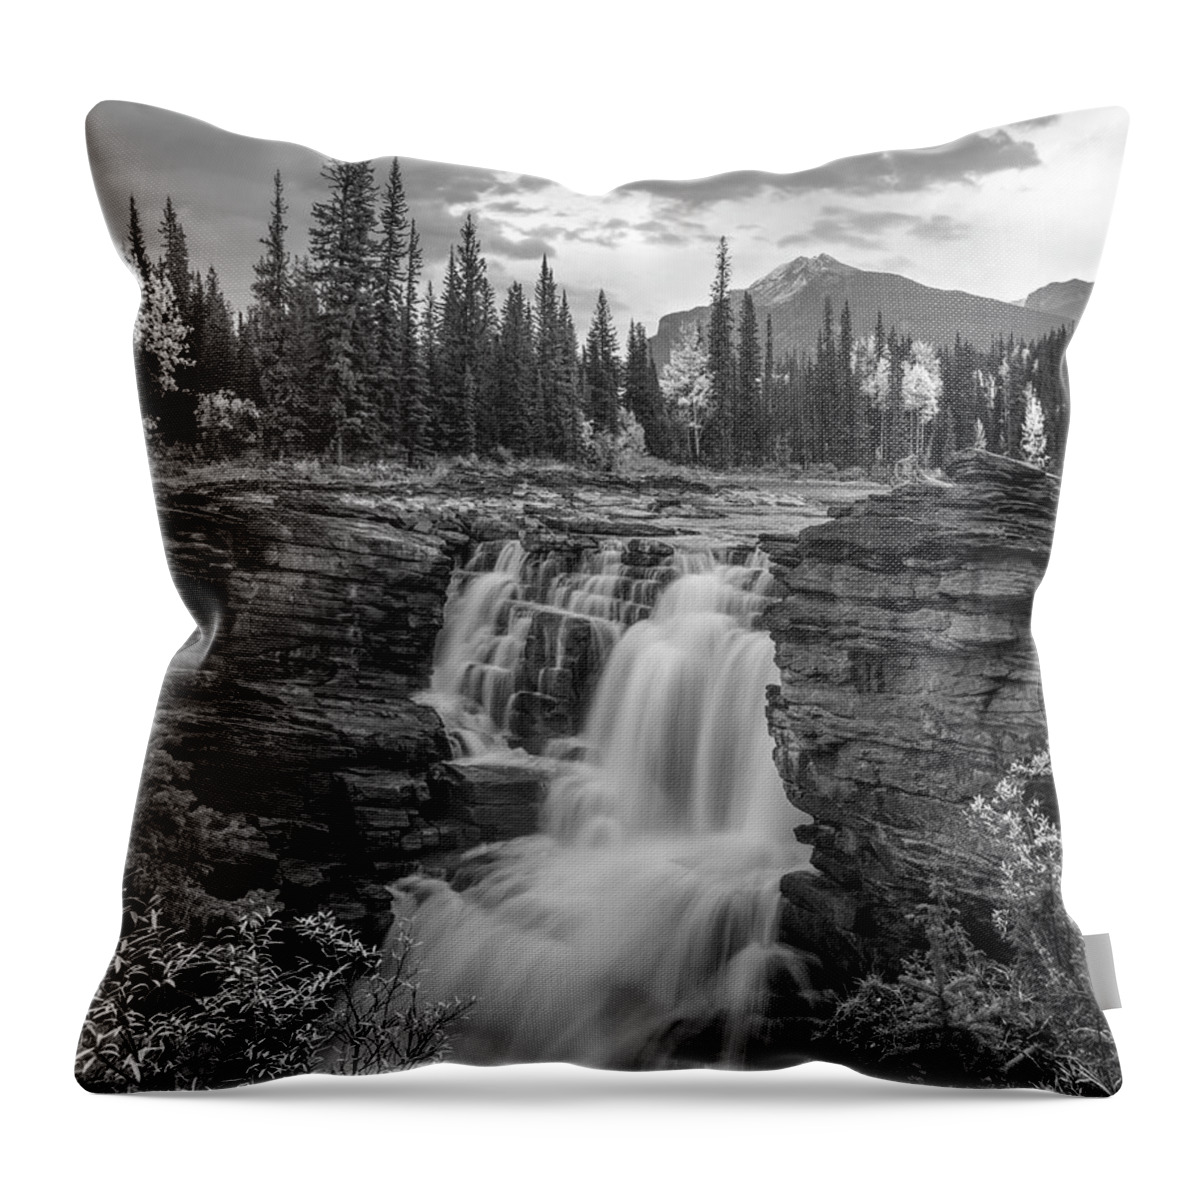 Disk1215 Throw Pillow featuring the photograph Athabasca Falls Jasper National Park #1 by Tim Fitzharris